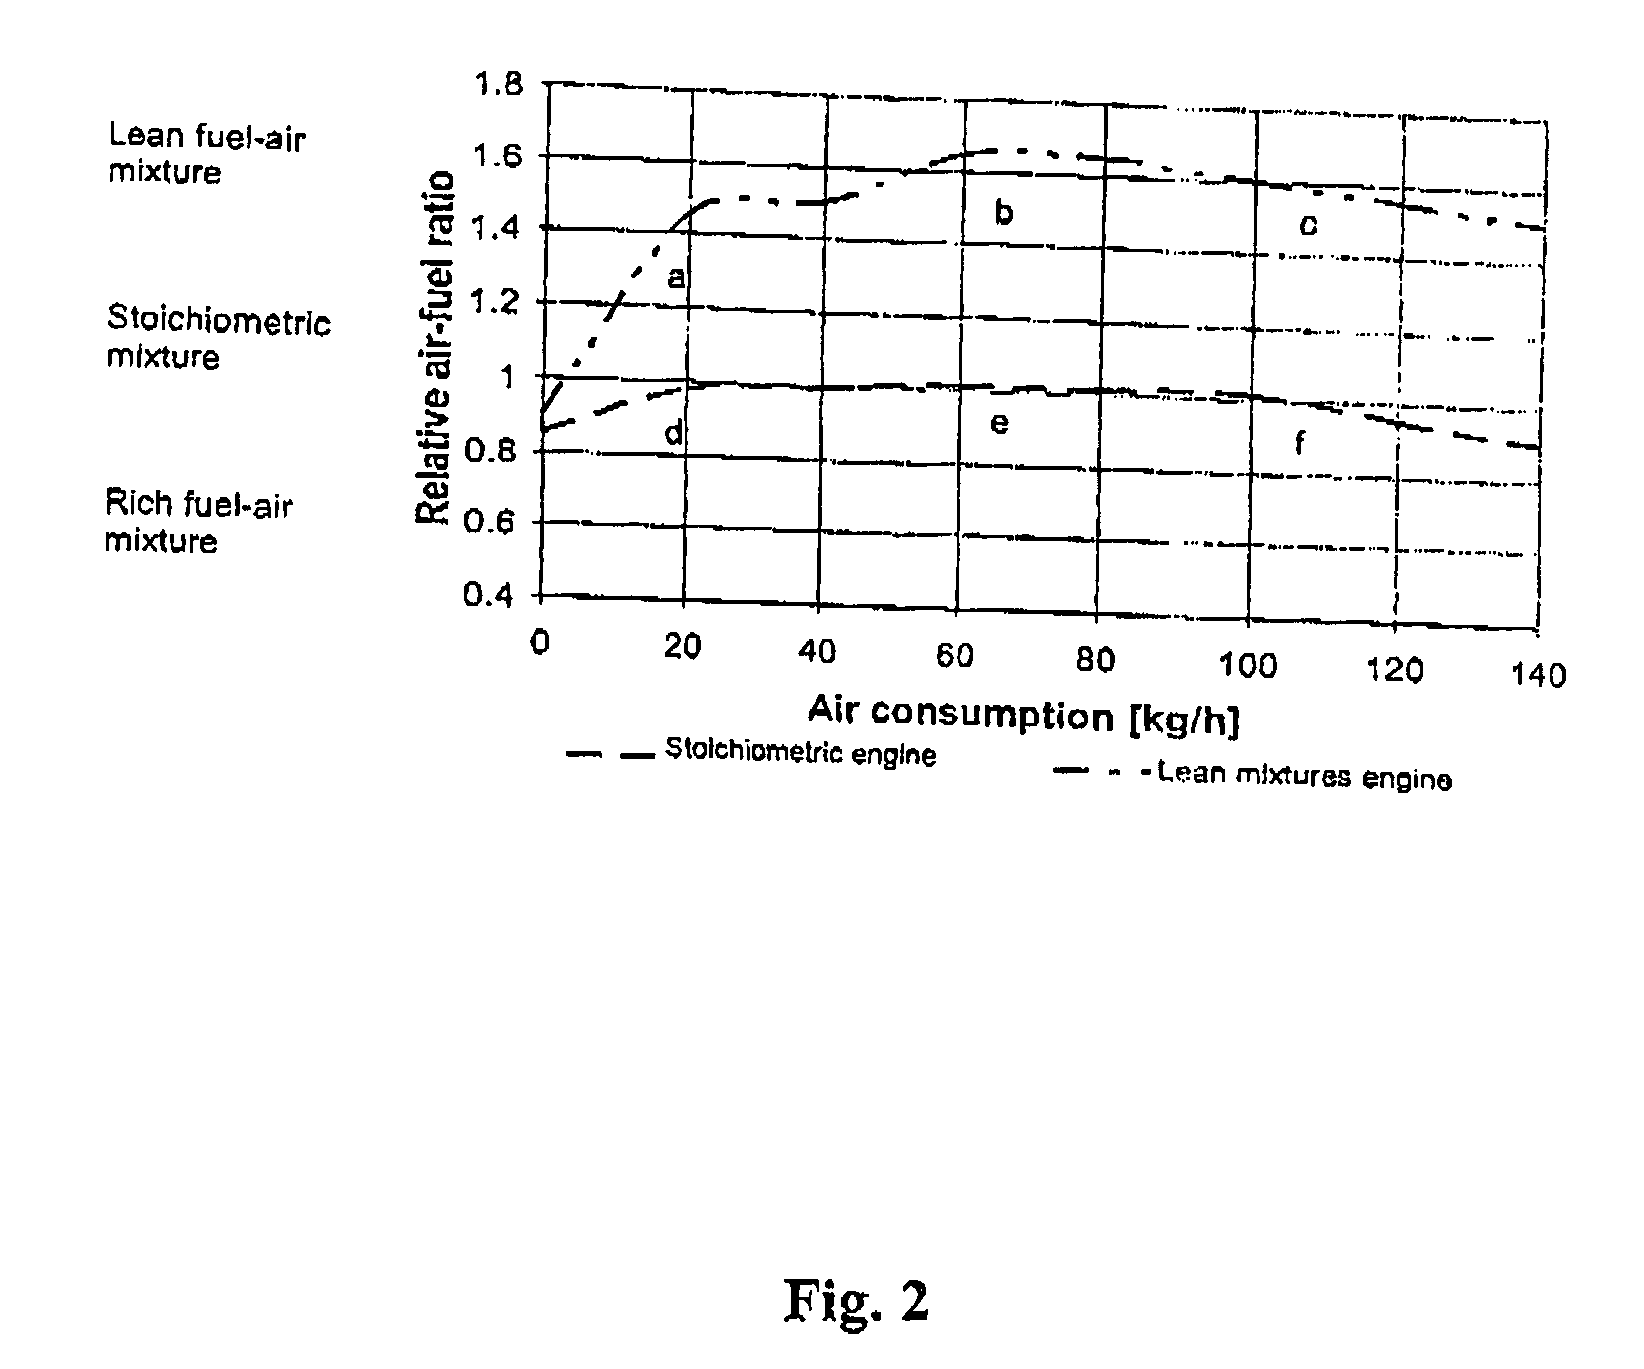 Method of using lean fuel-air mixtures at all operating regimes of a spark ignition engine